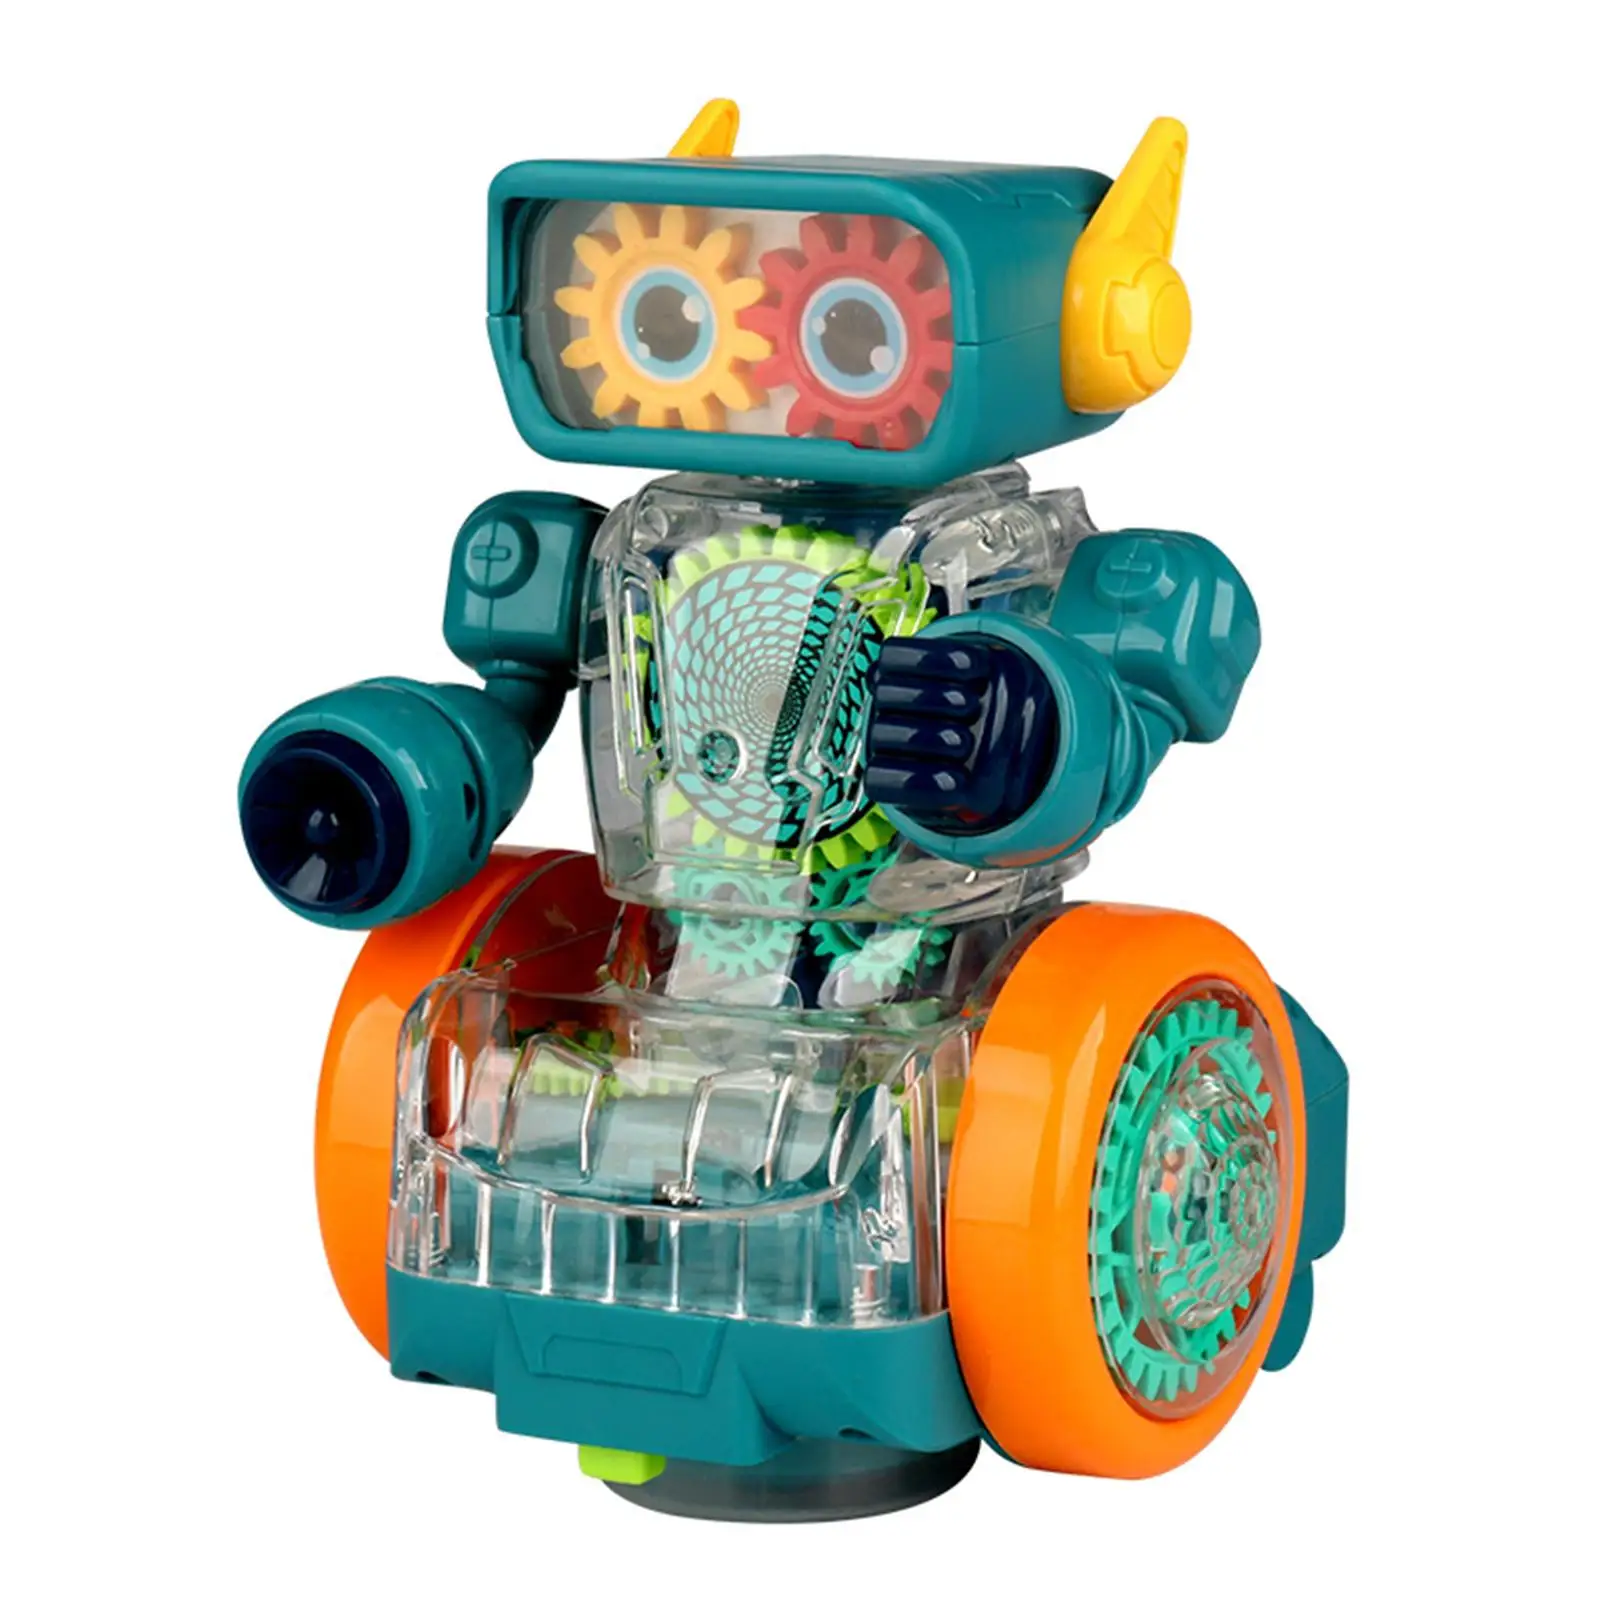 Transparent Mechanical Gear Robot Toy with Lighting Gear Toy for Kids